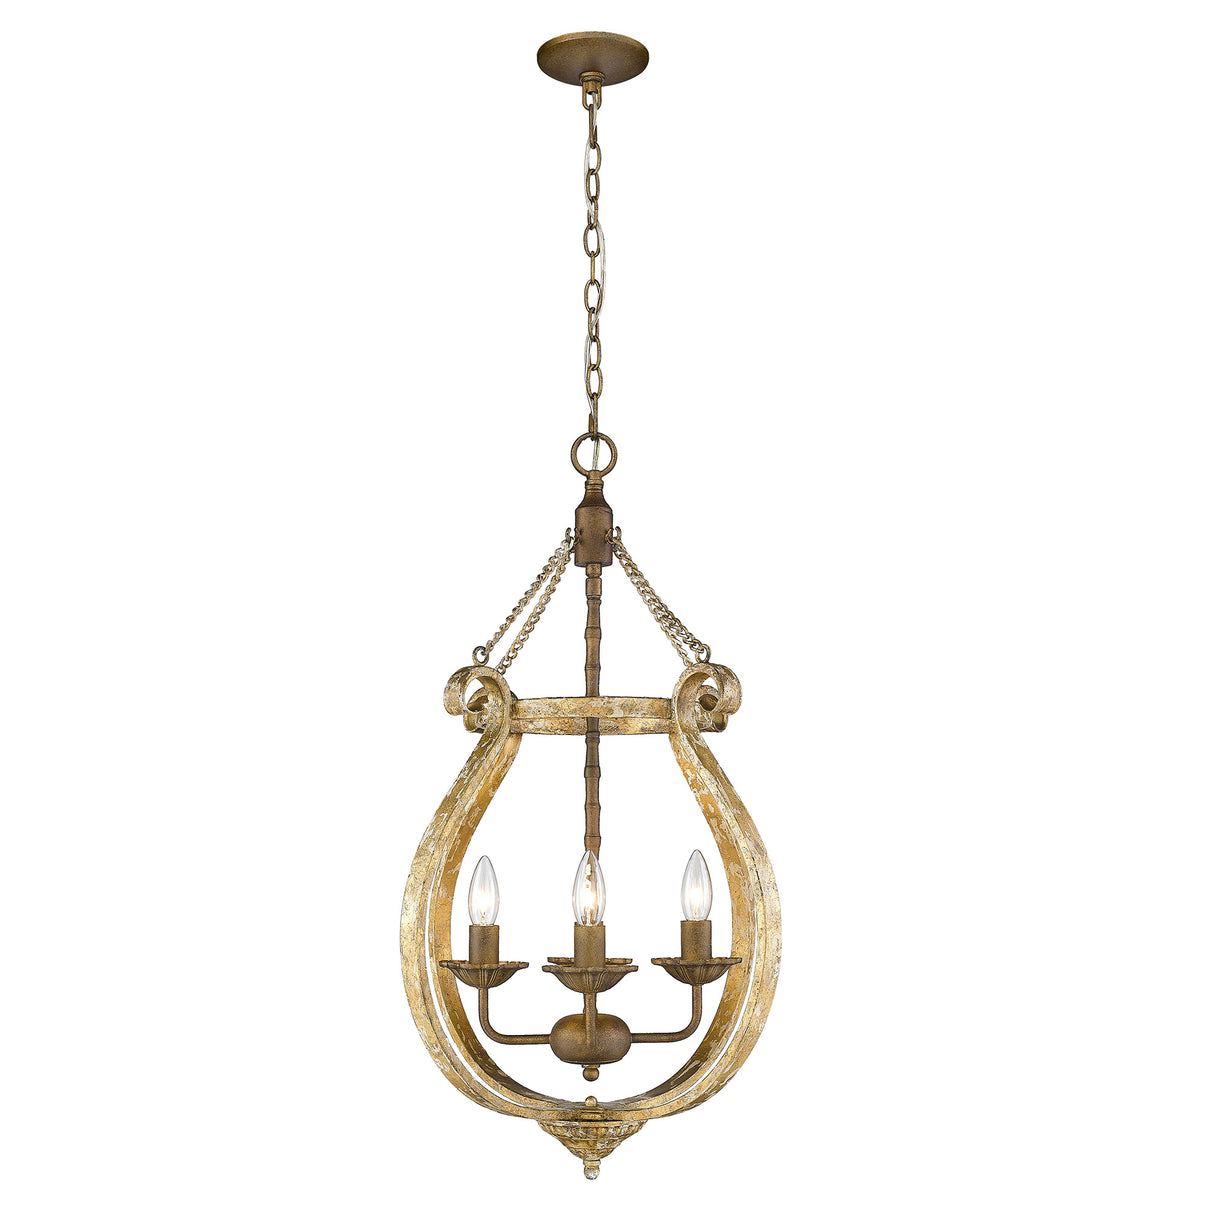 Delphine 4 Light Pendant in Burnished Chestnut with Vintage Gold Shade